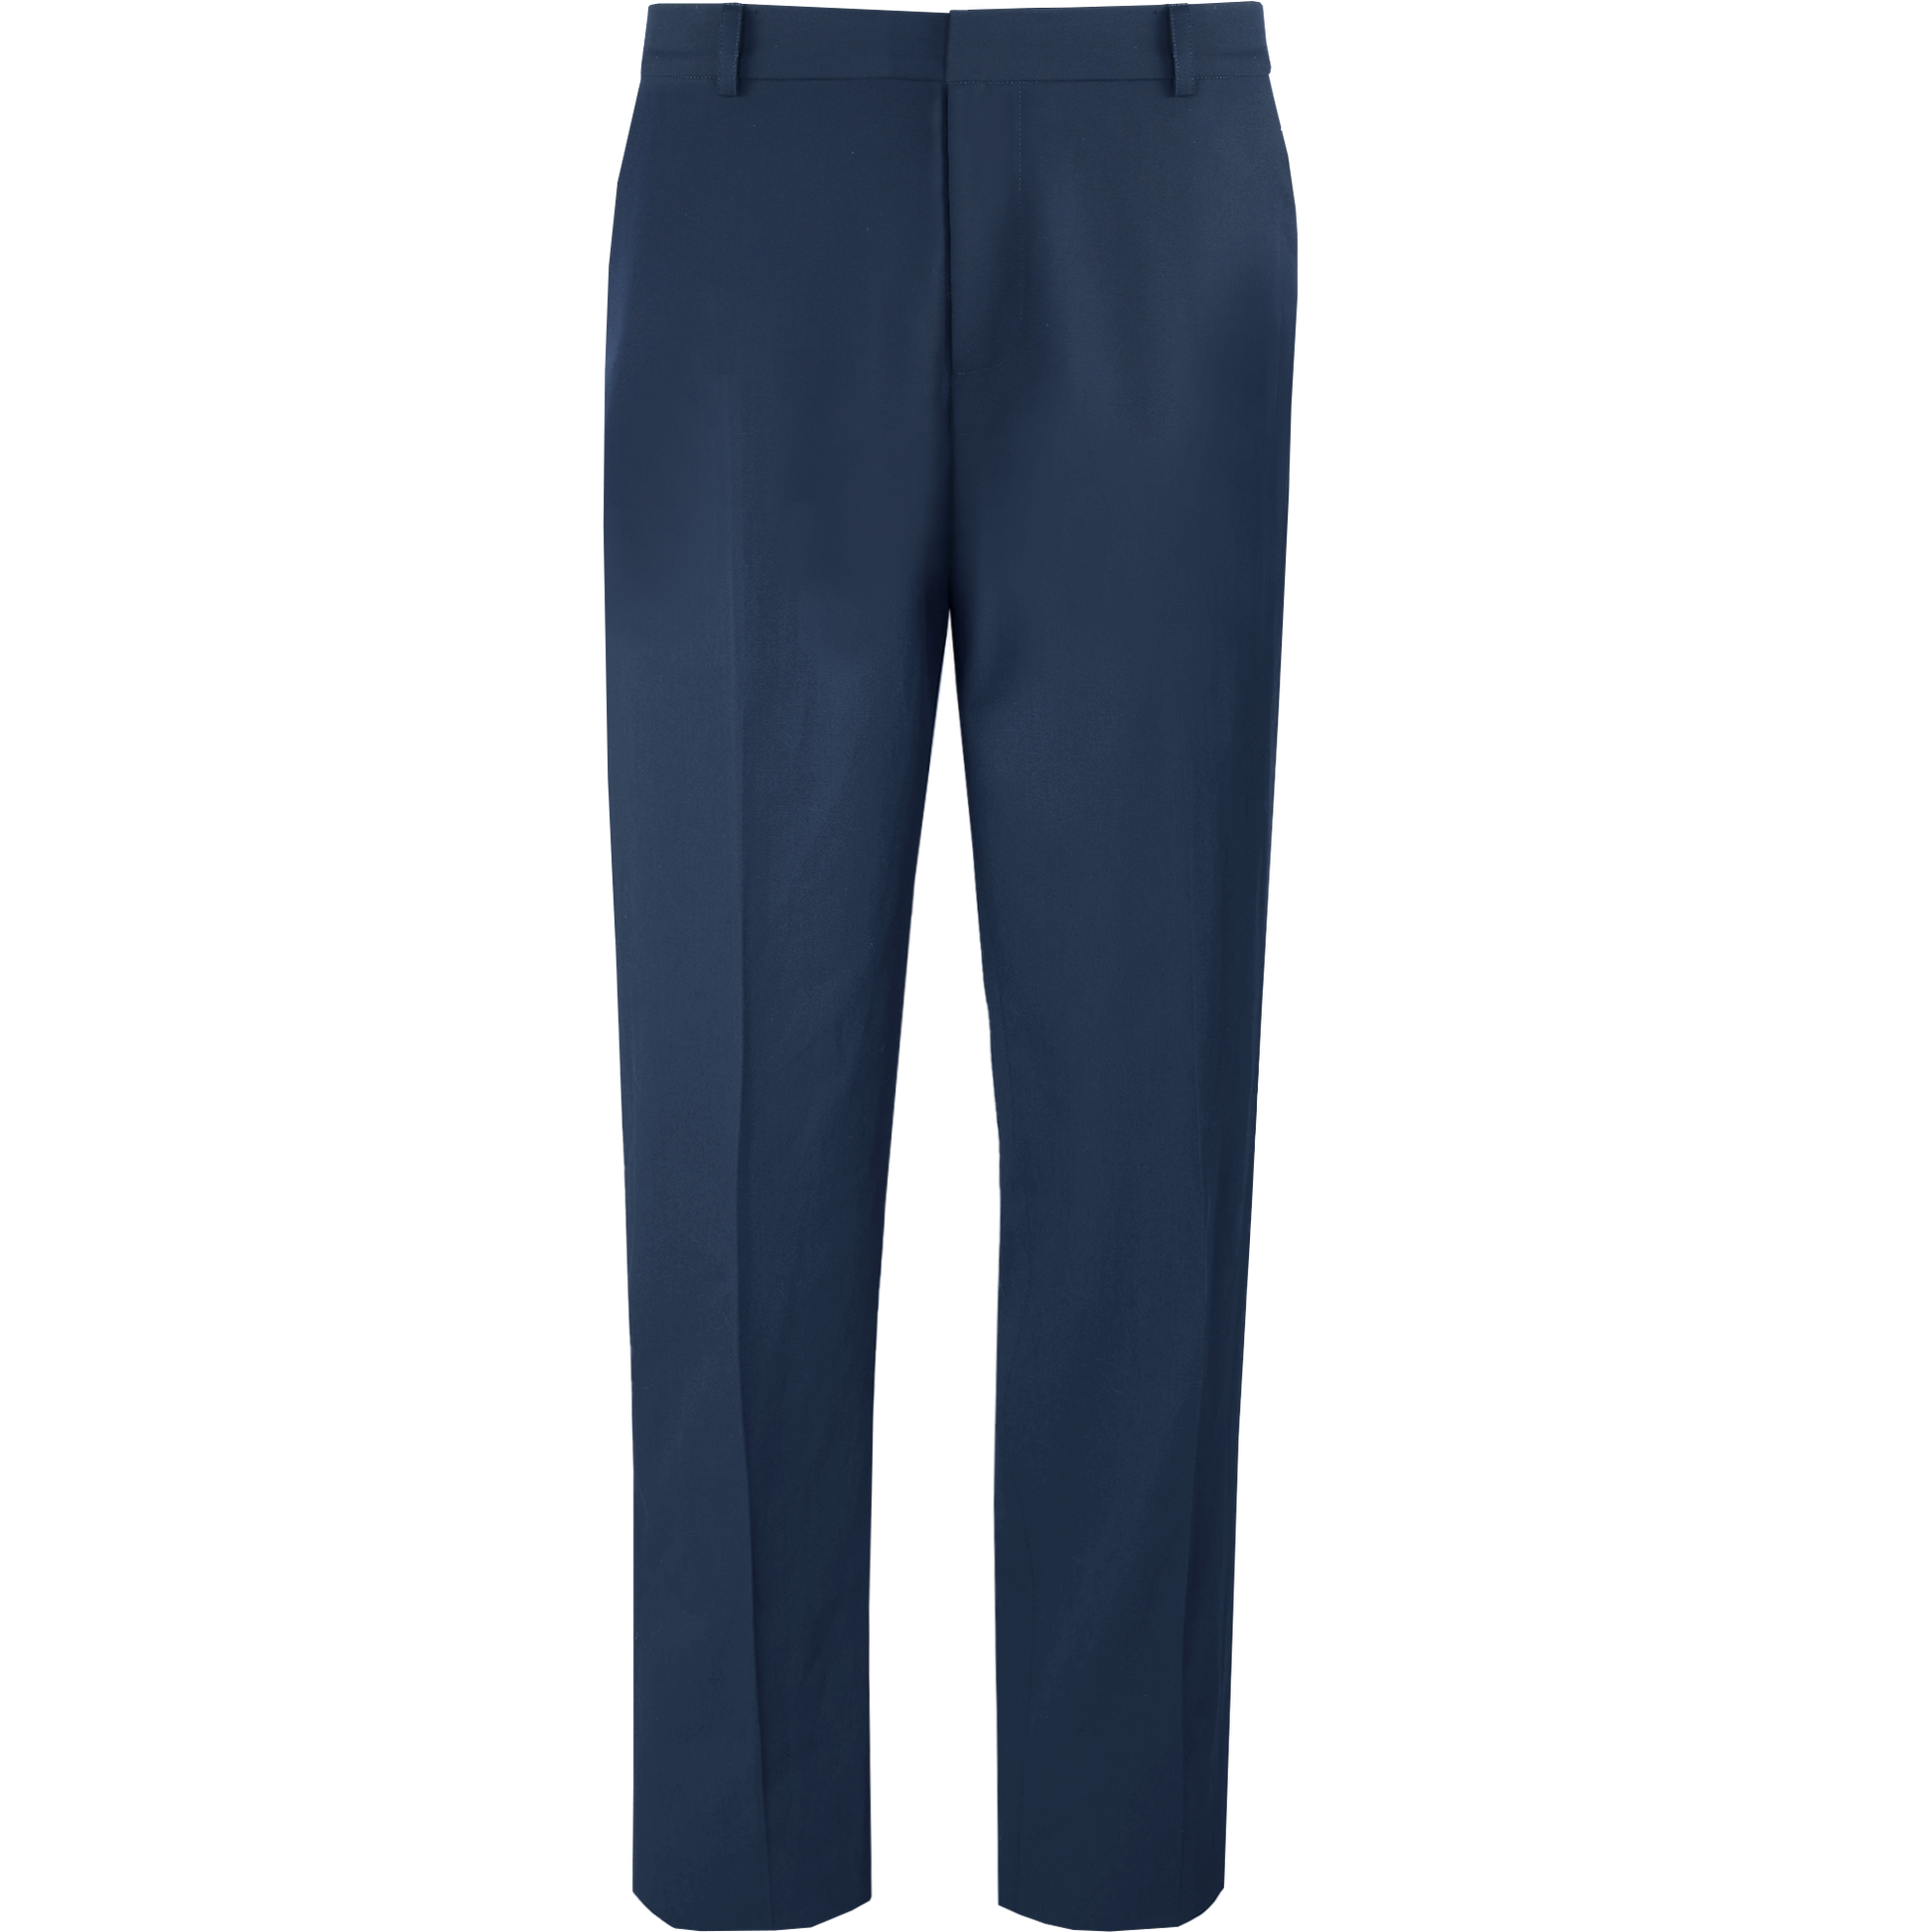 Mens Corporate Uniform Pants in Navy by CYC Corporate Label –  CYCCorporateLabel